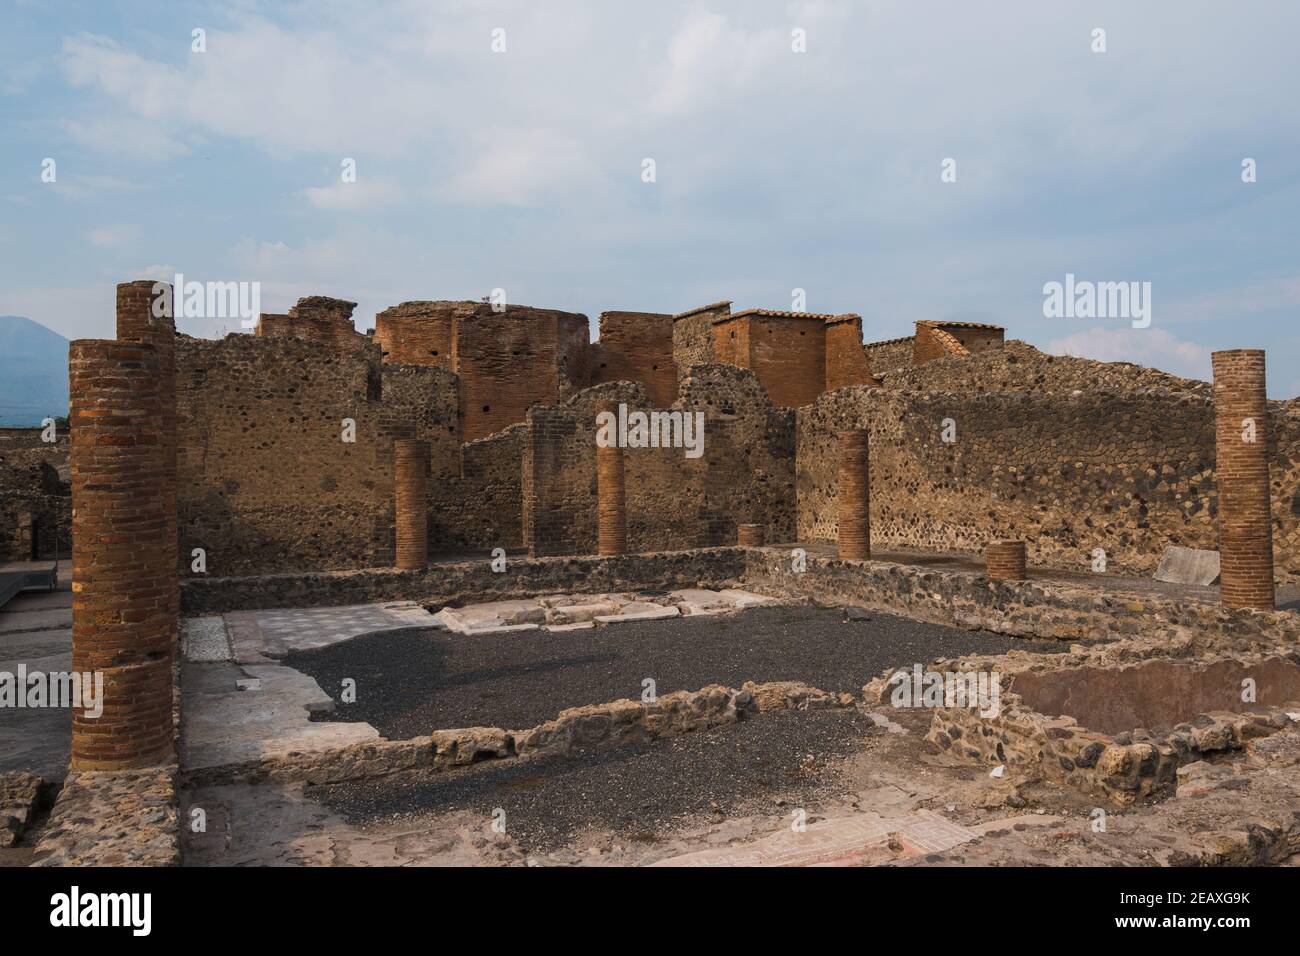 The ancient Roman ruins of Pompeii, near Naples; a historical city in southern Italy that was buried by the 79 A.D. eruption of Mount Vesuvius. Stock Photo